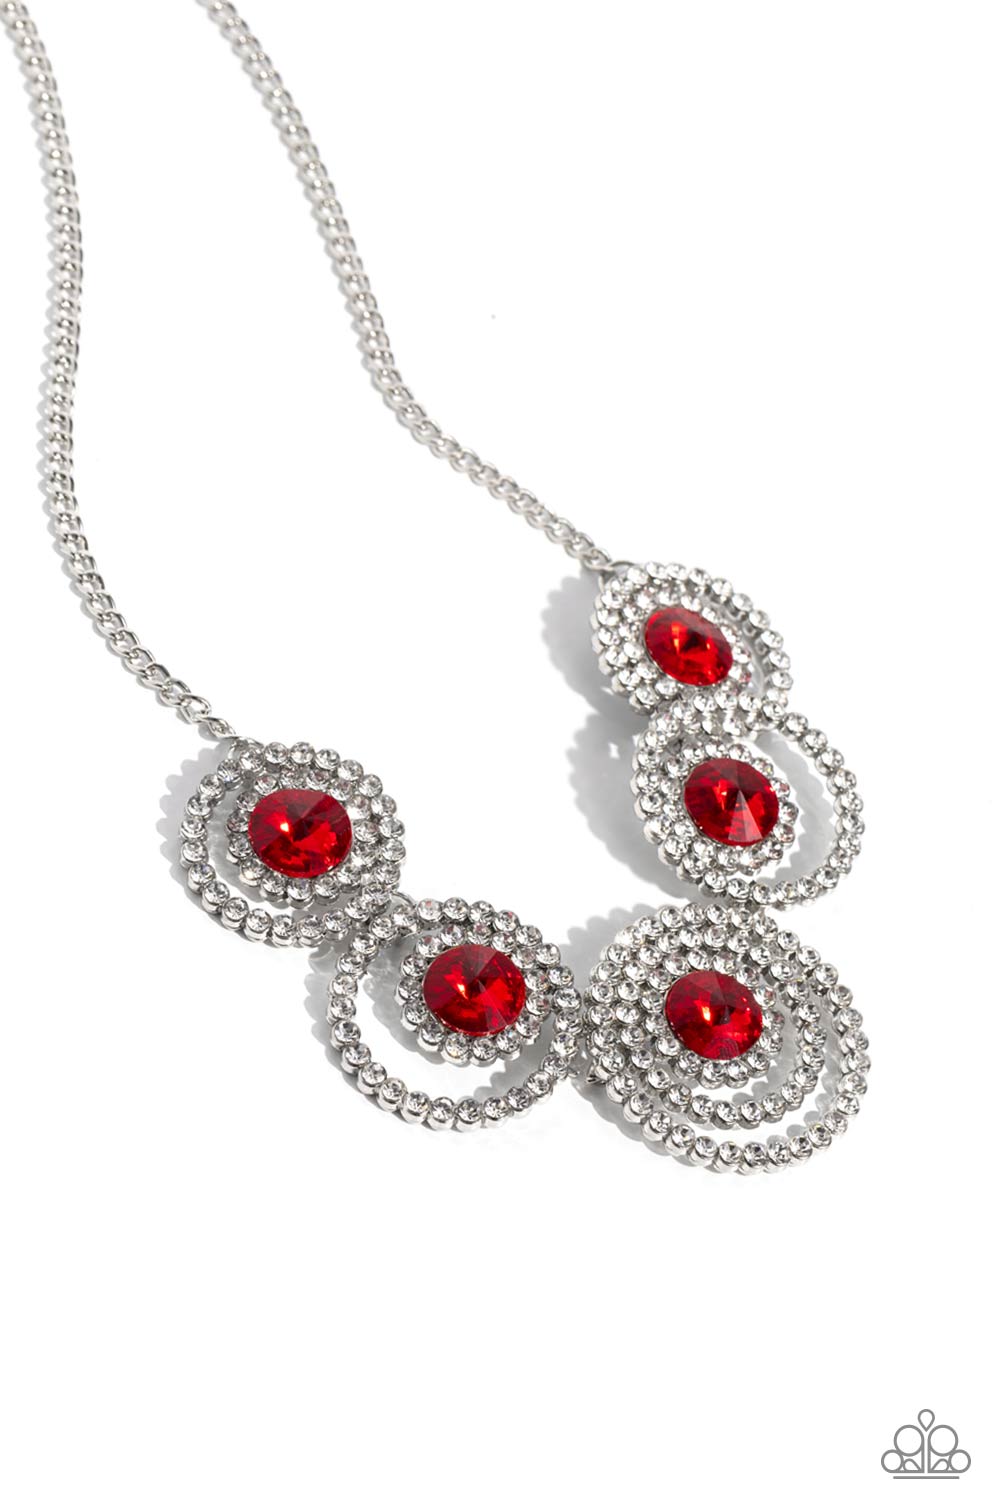 five-dollar-jewelry-dramatic-darling-red-paparazzi-accessories